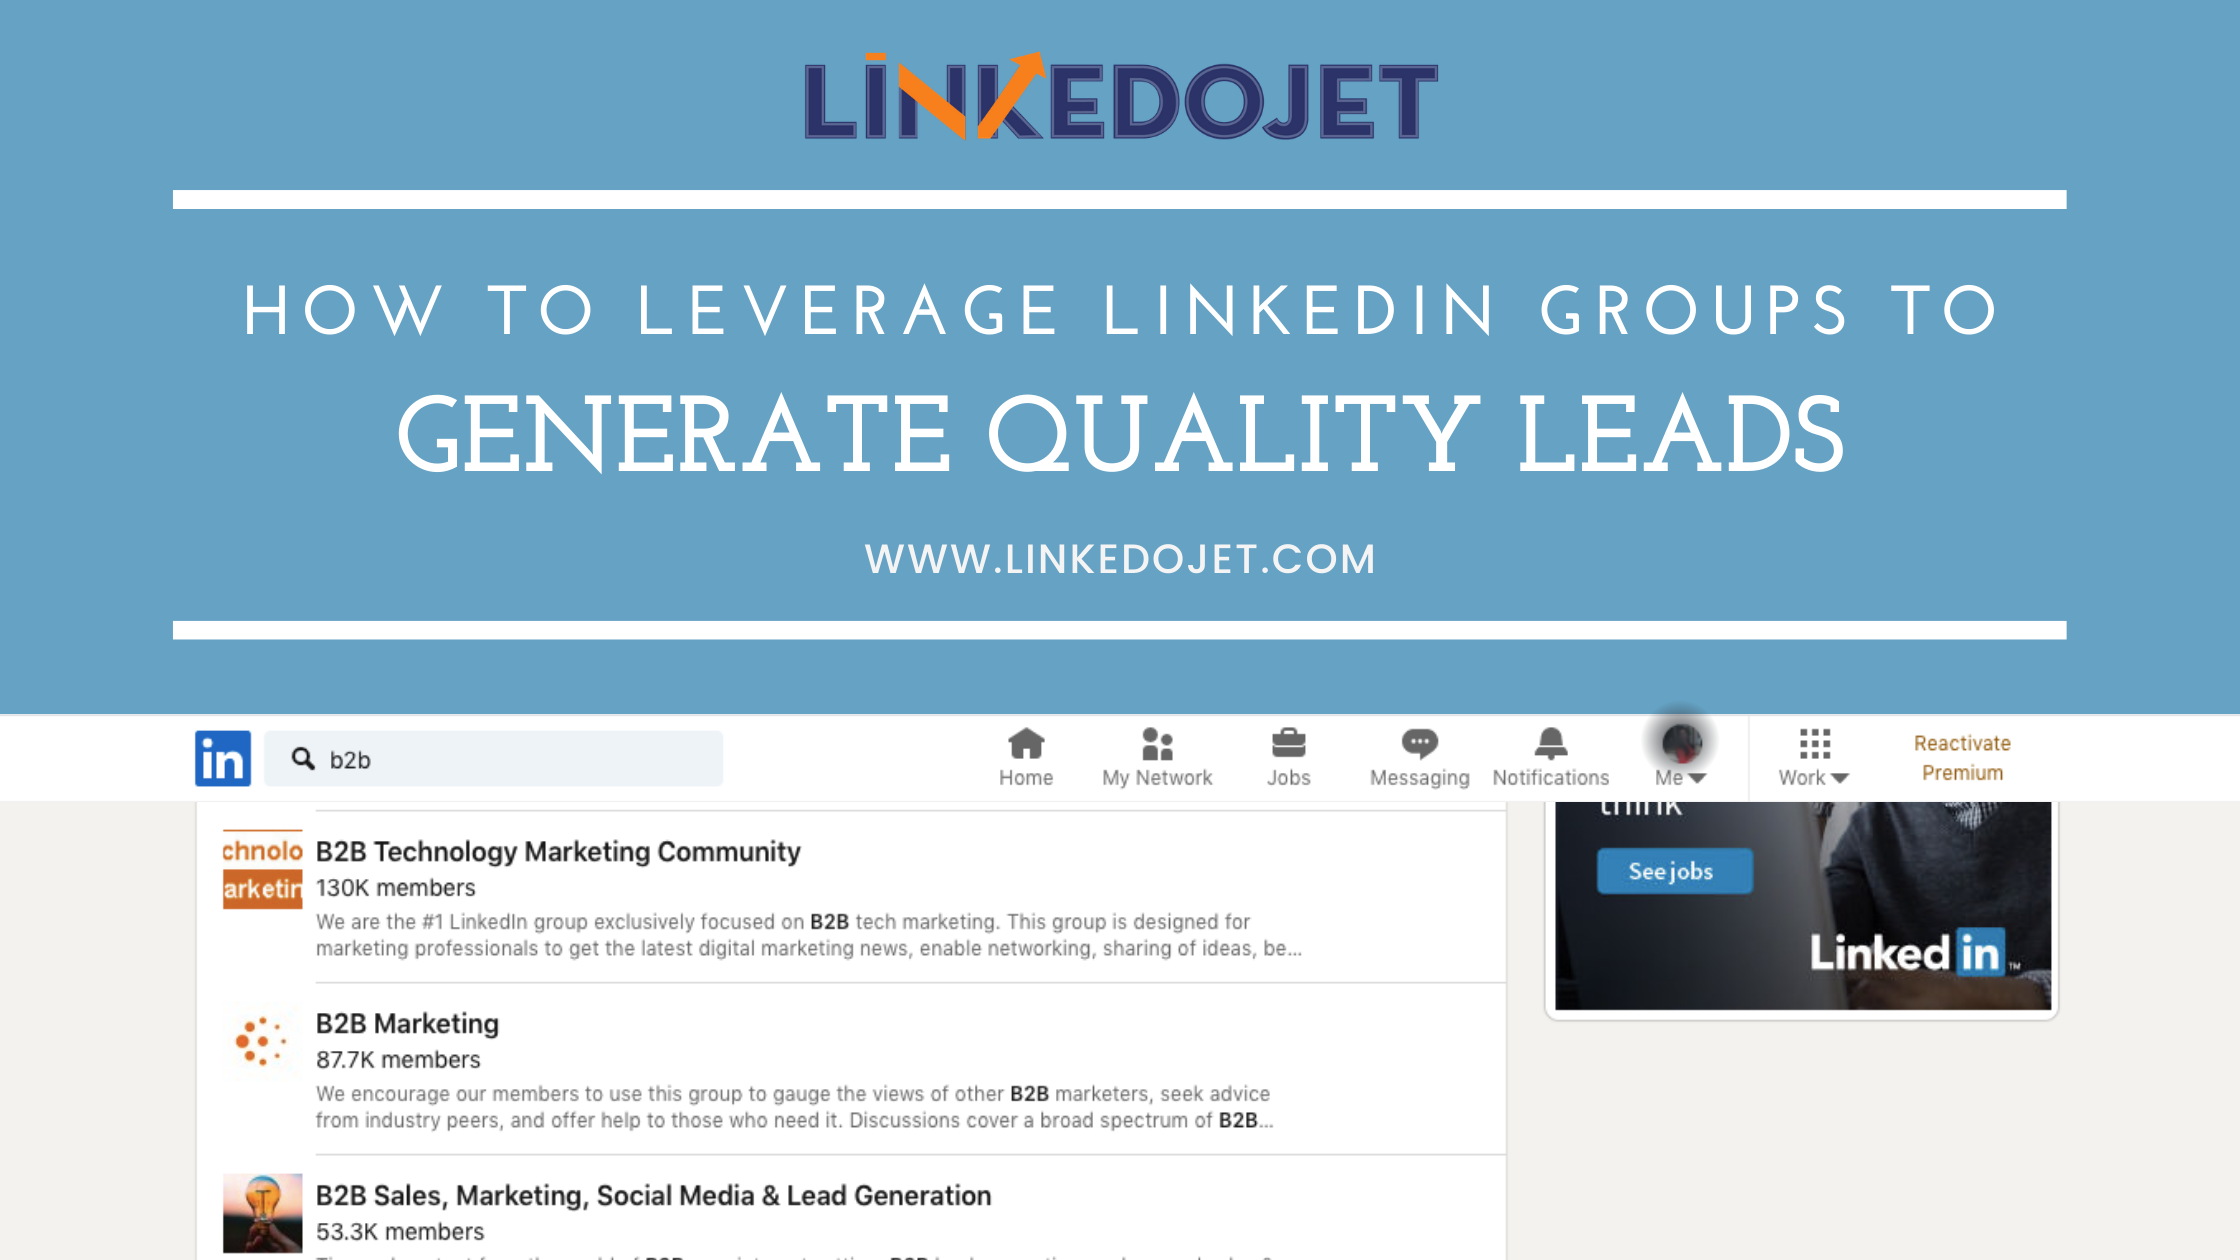 How To Leverage LinkedIn Groups To Generate Quality Leads Today?